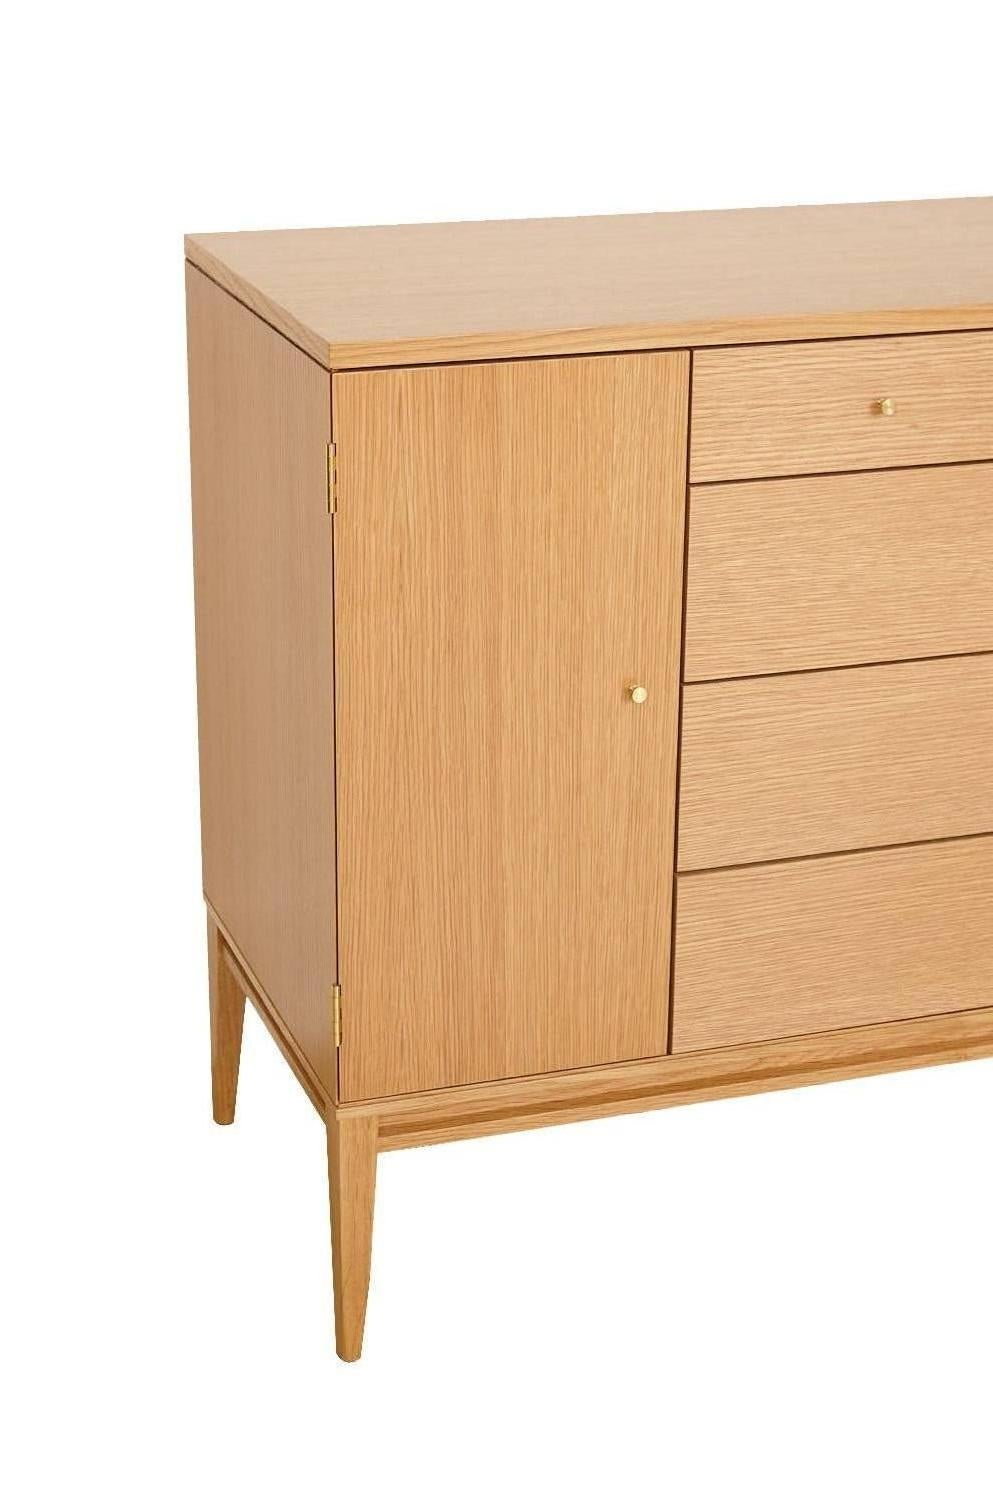 Trapp white rift oak 20-drawer dresser. Dresser features ten exterior drawers with ten interior small drawers behind left and right side doors. Fun dovetail joinery and solid brass hardware throughout.